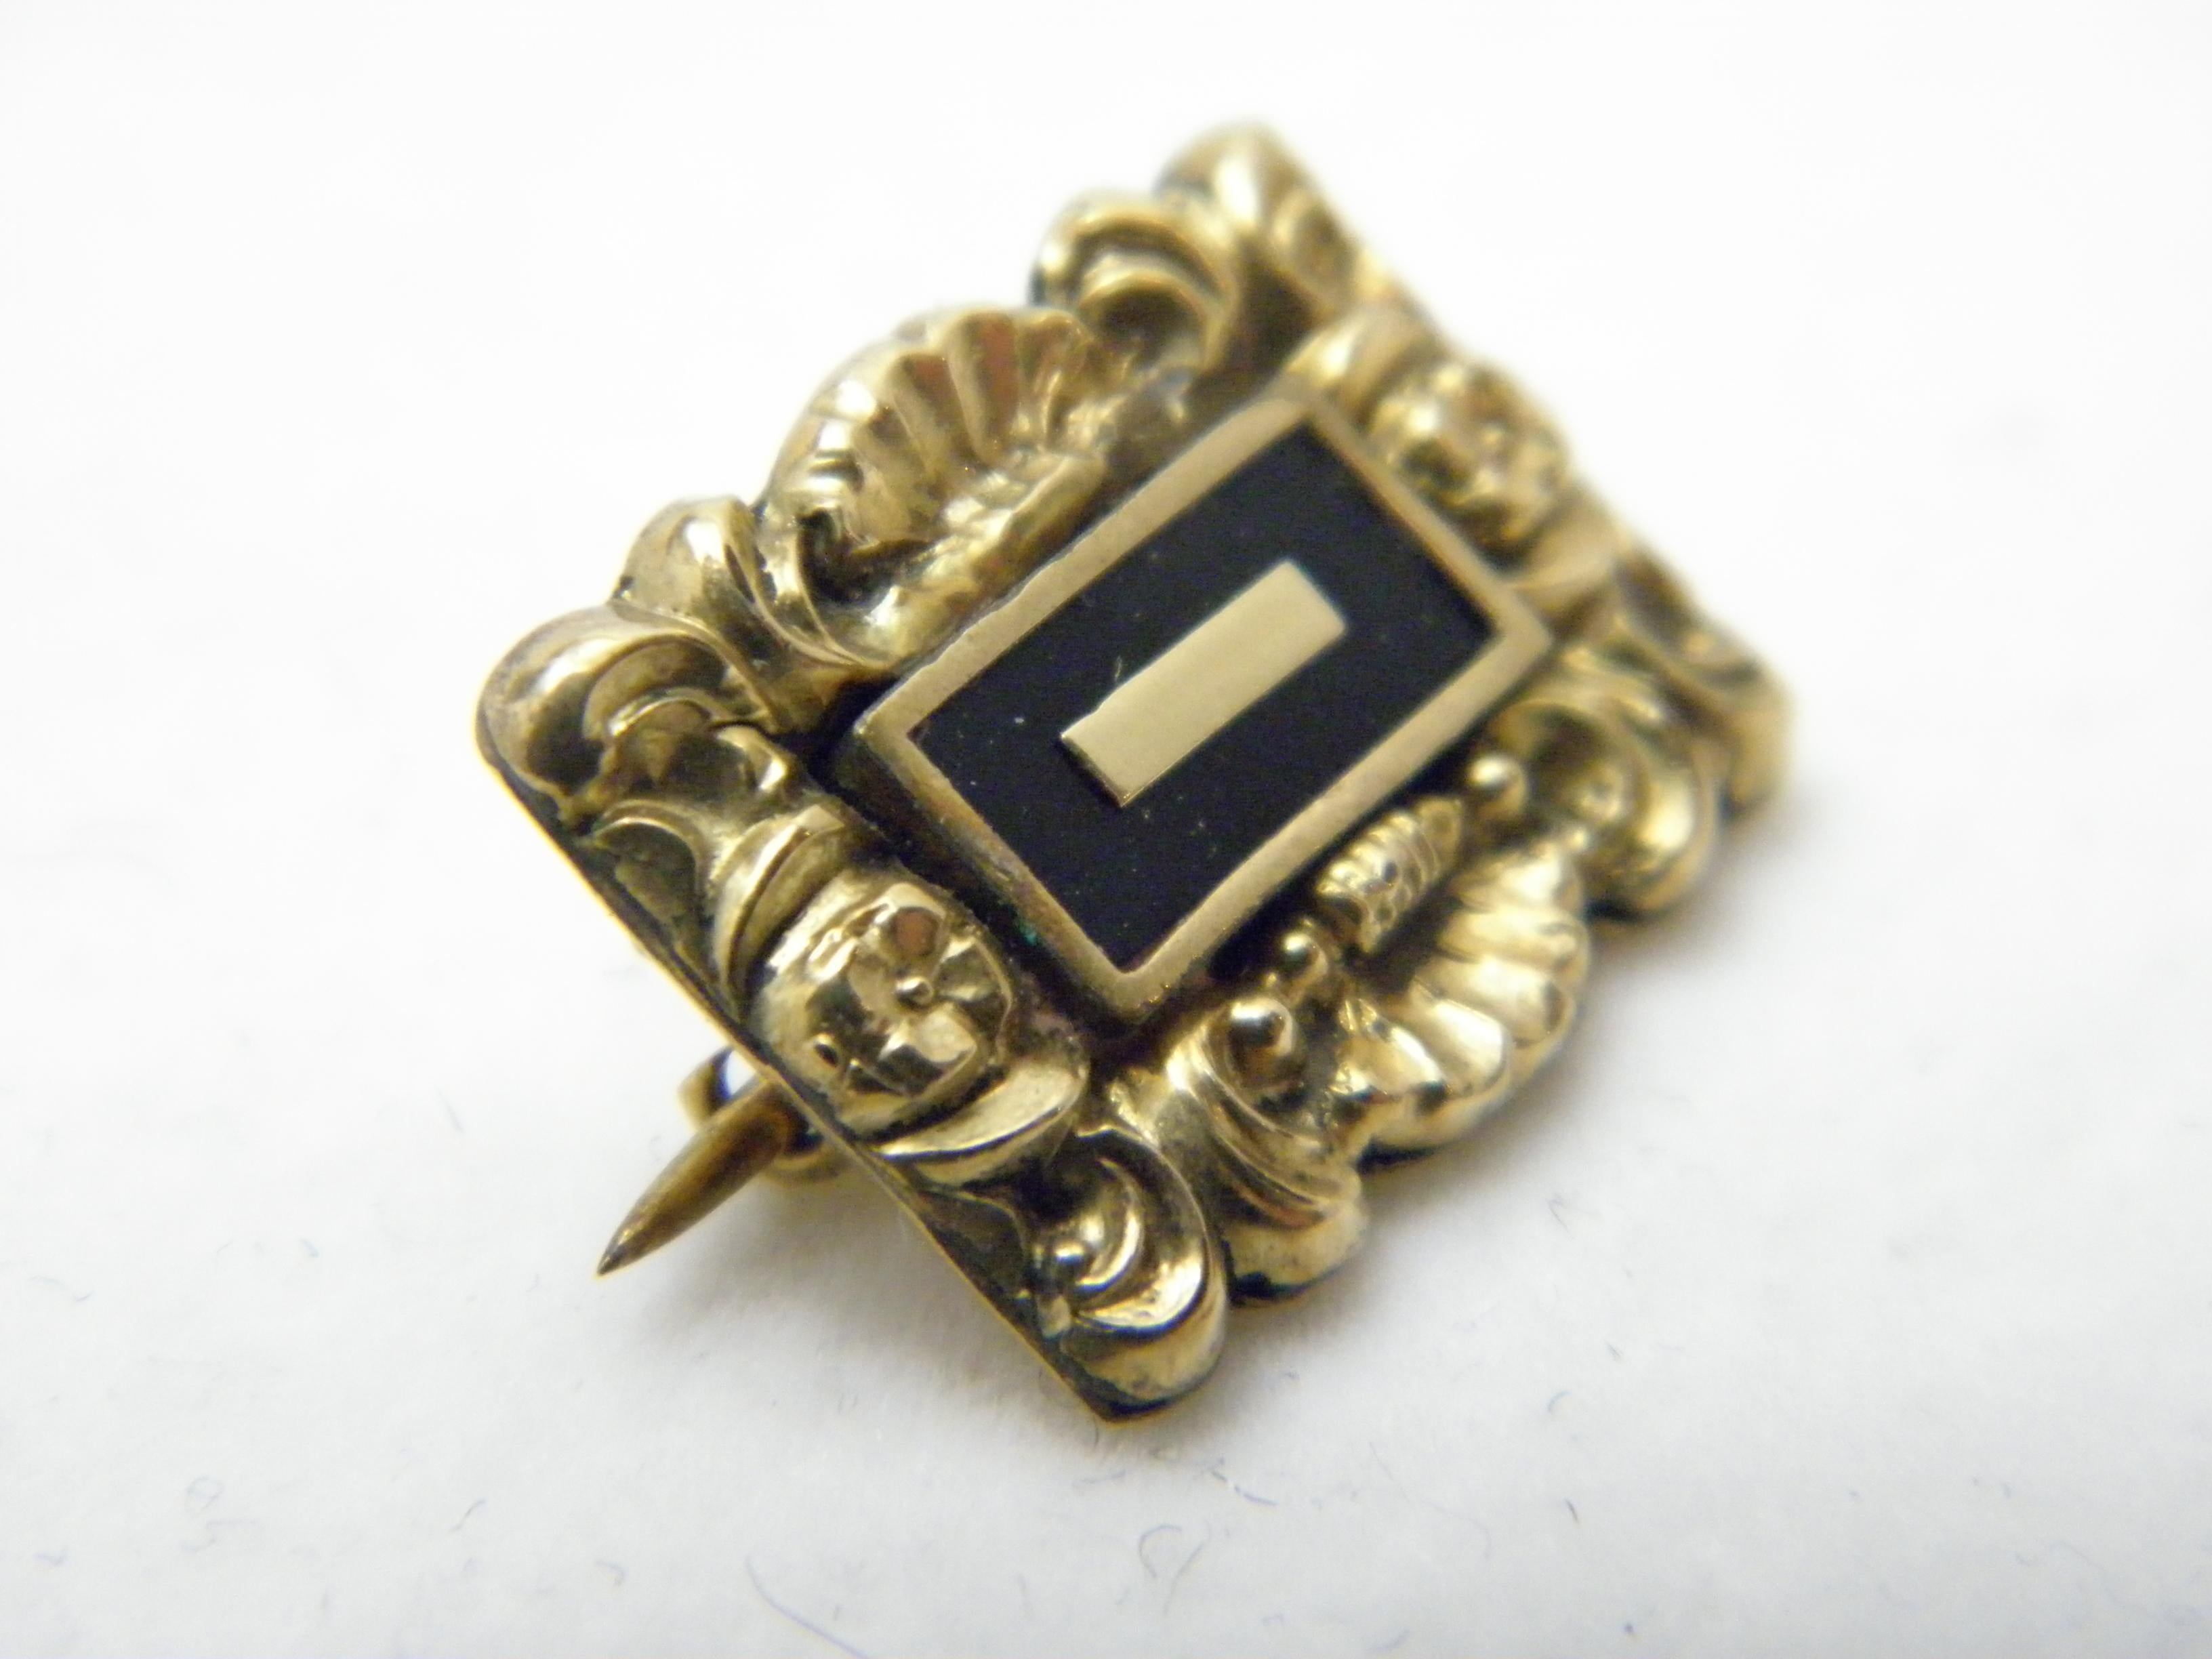 Women's or Men's Antique 18ct Gold Enamel Mourning Brooch Pin c1850 750 Purity Detailed For Sale